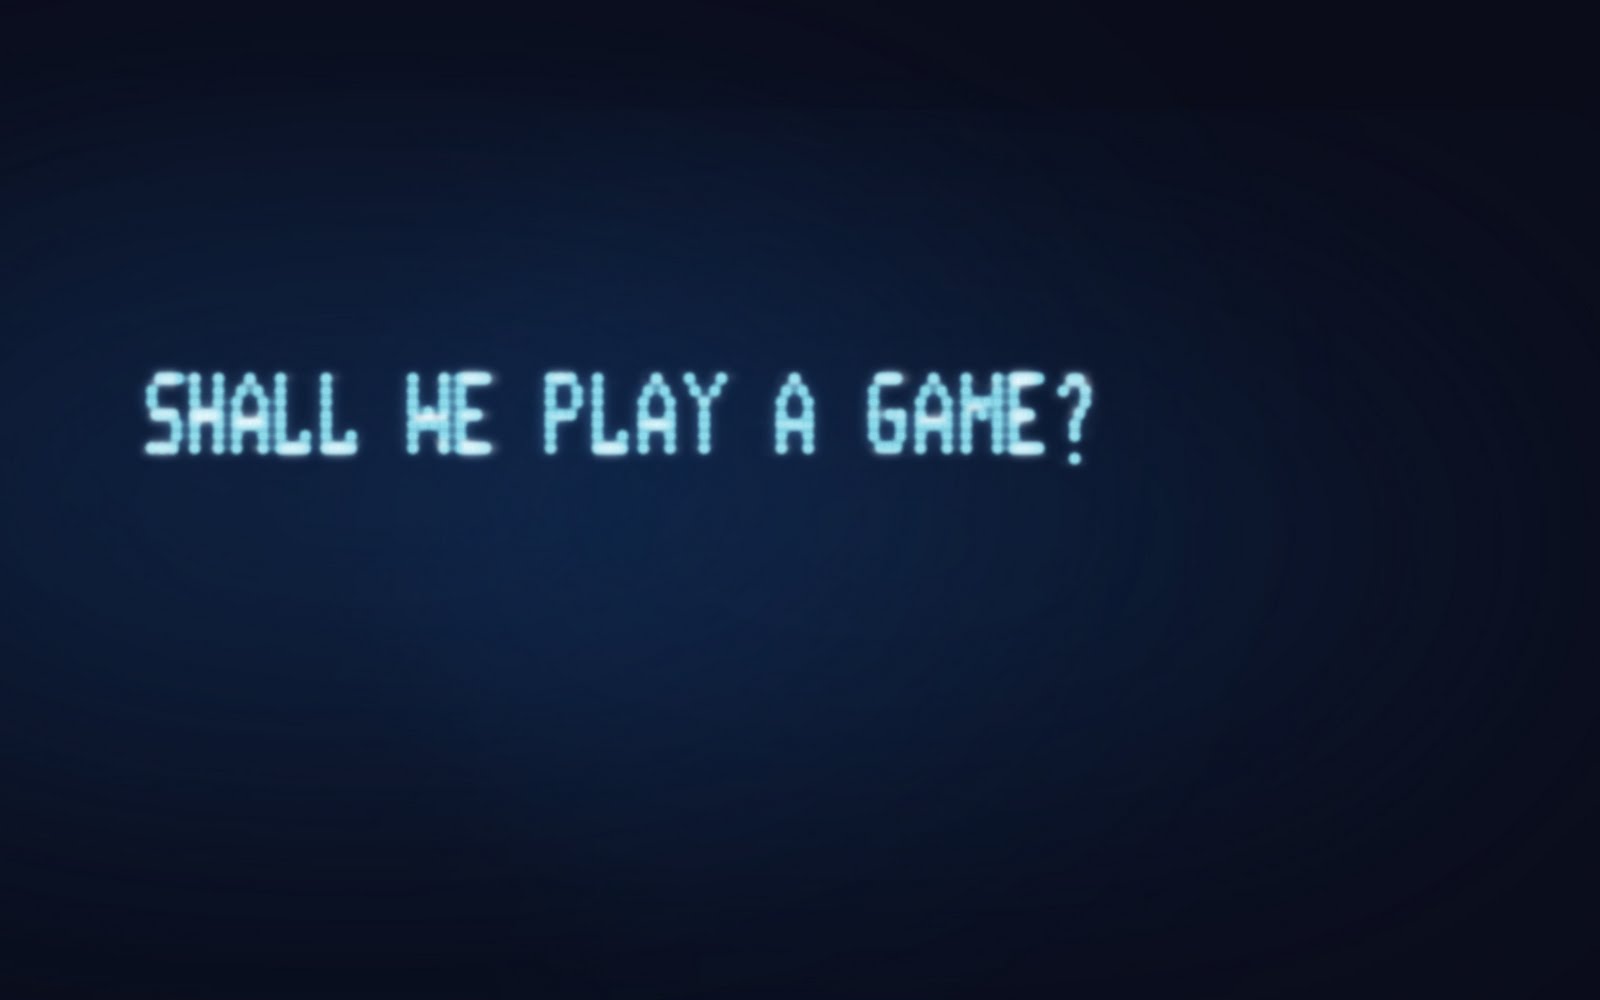 shall_we_play_a_game__by_newSaint